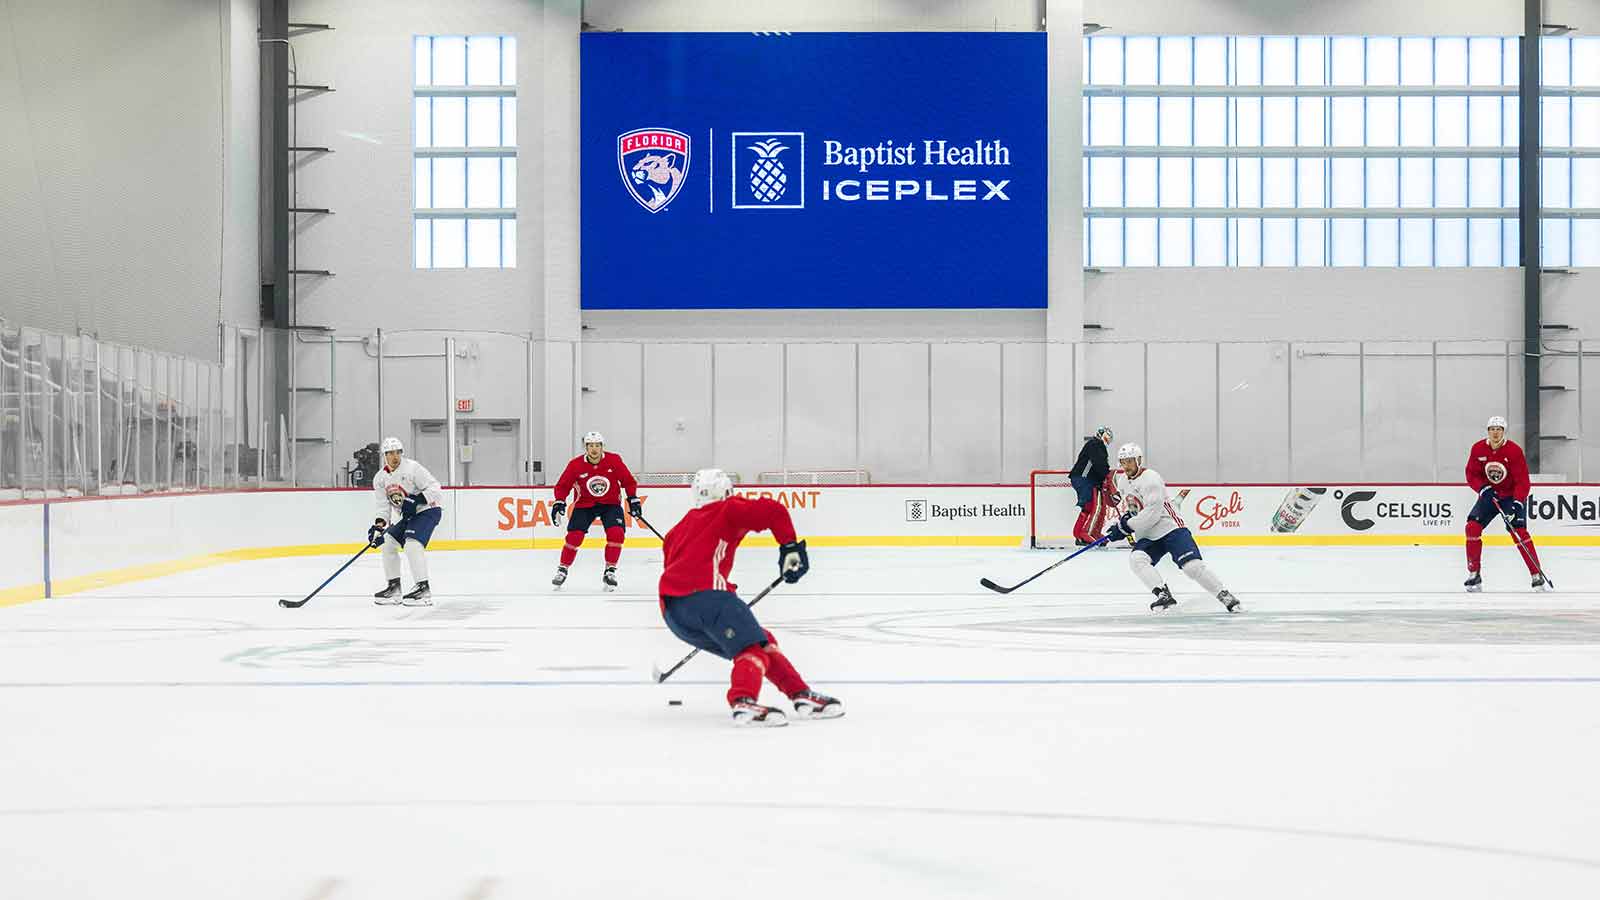 Florida Panthers practicing at Baptist Health IcePlex